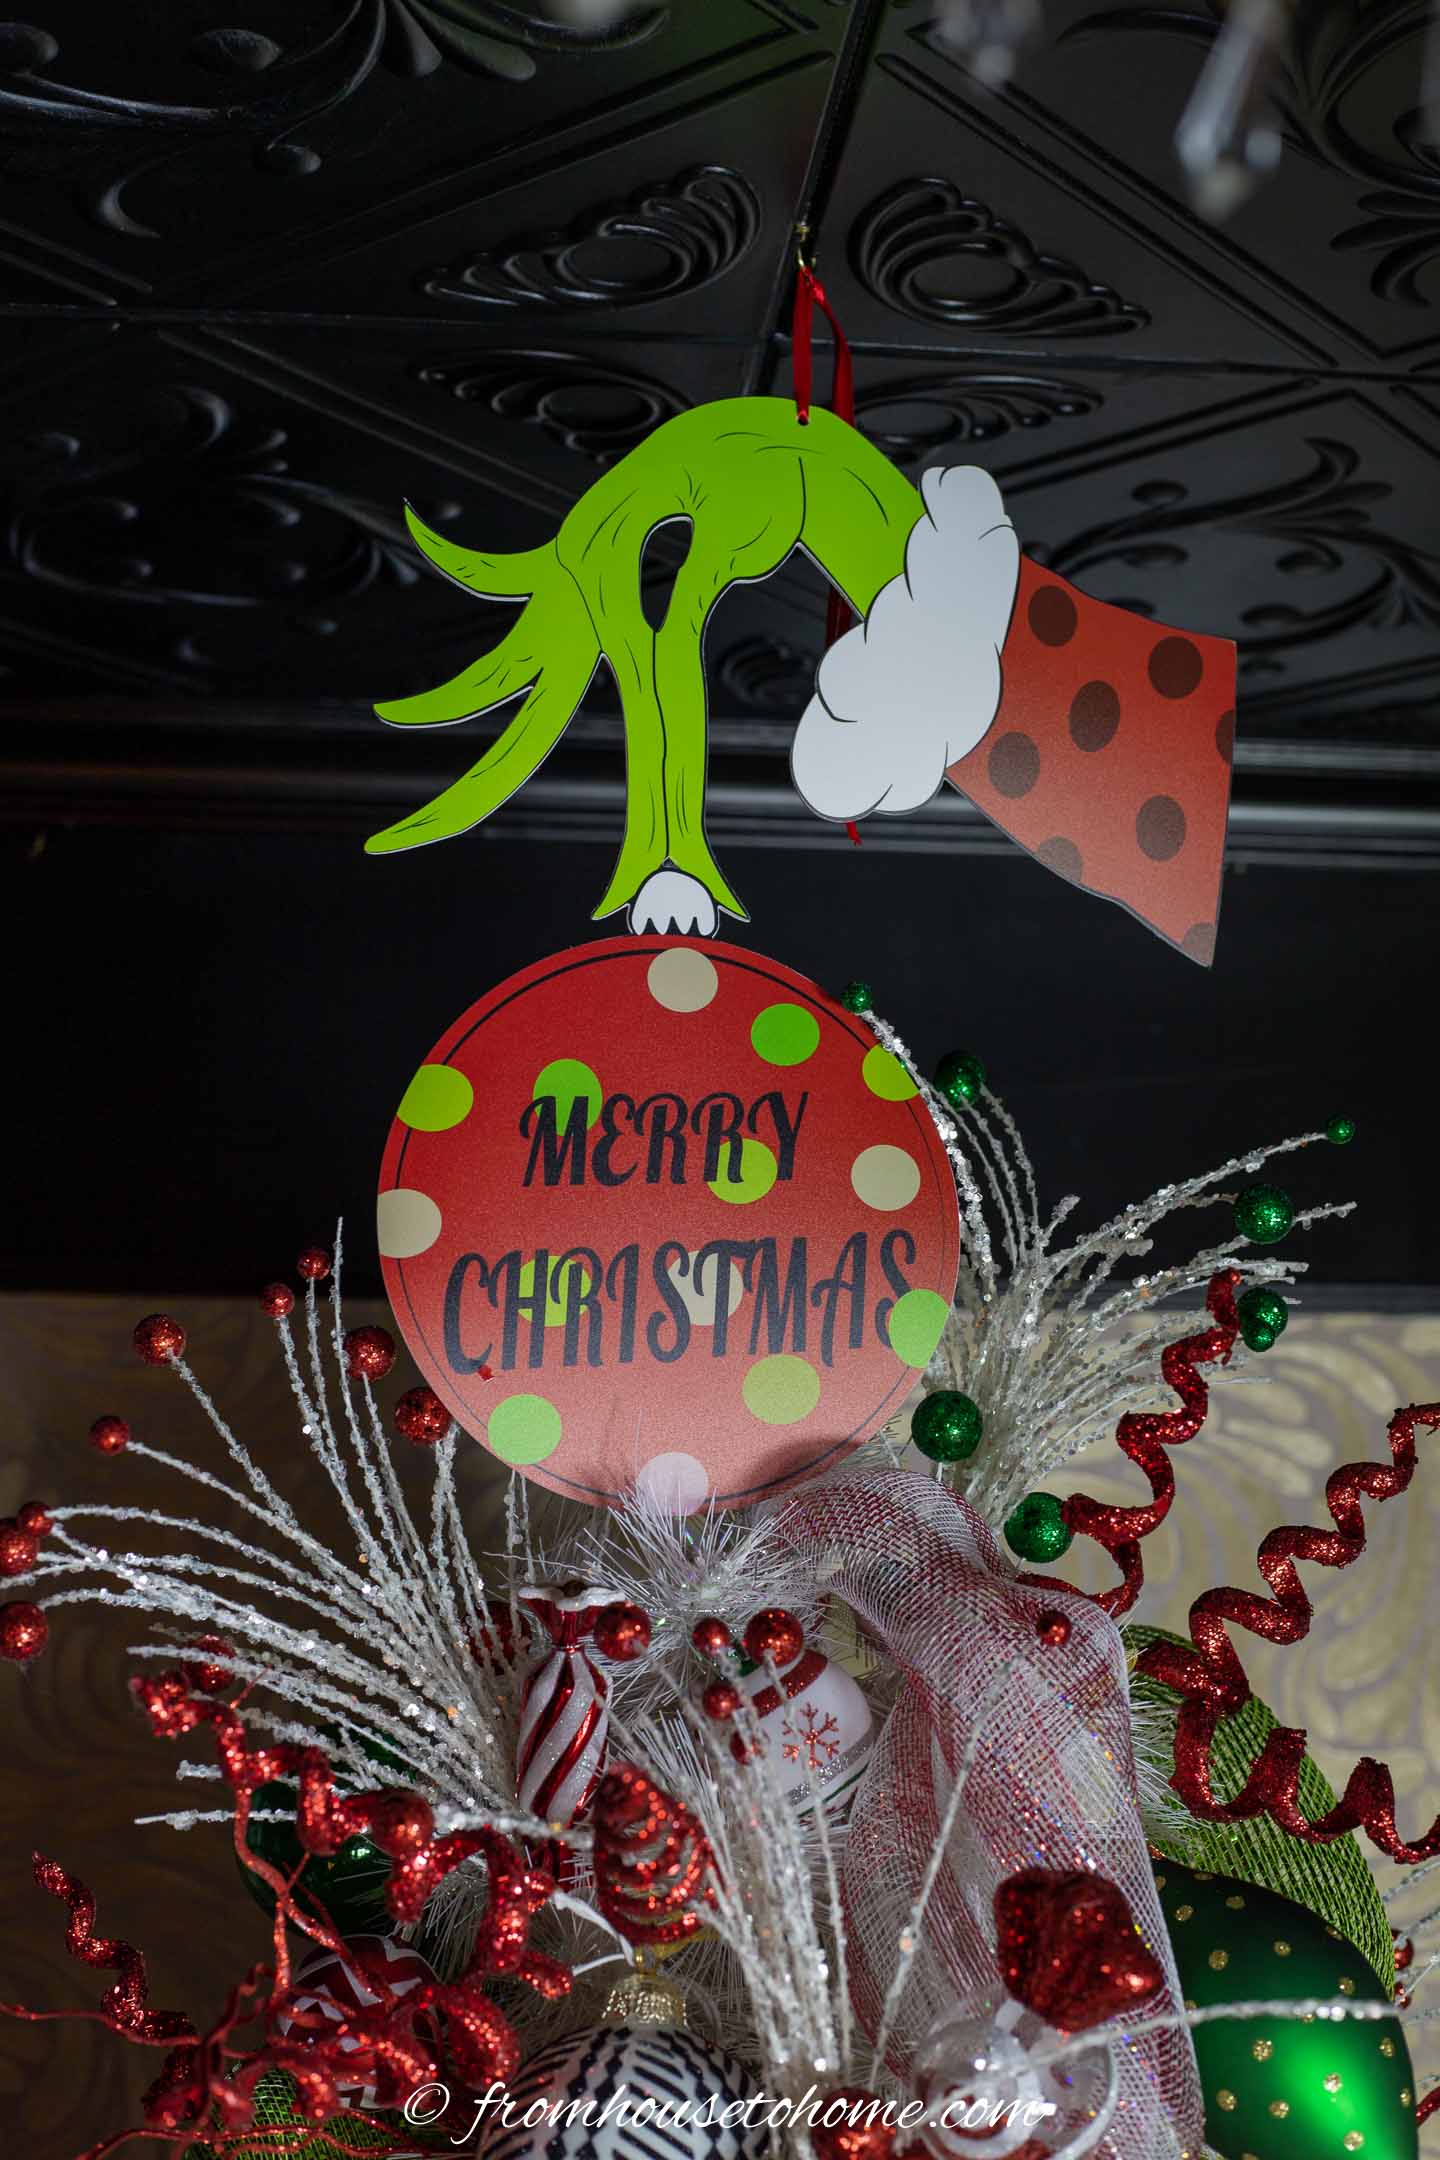 Grinch hand and ornament used as a Grinch Christmas tree topper